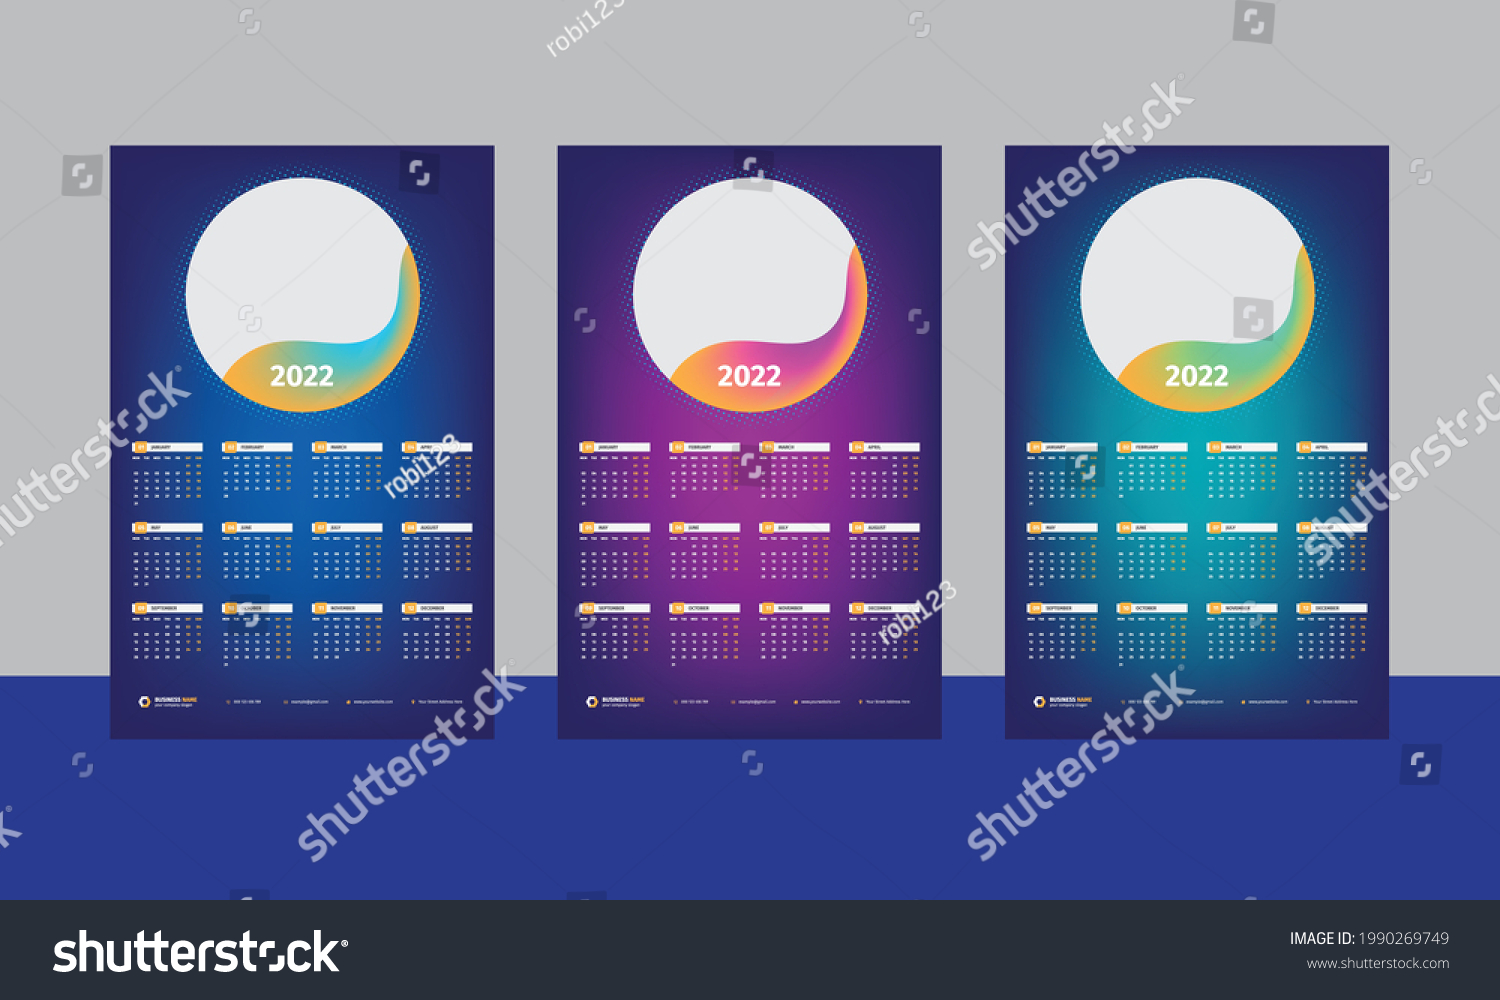 One Page Wall Calendar 2022 Template Stock Vector Royalty Free 1990269749 Shutterstock 0039